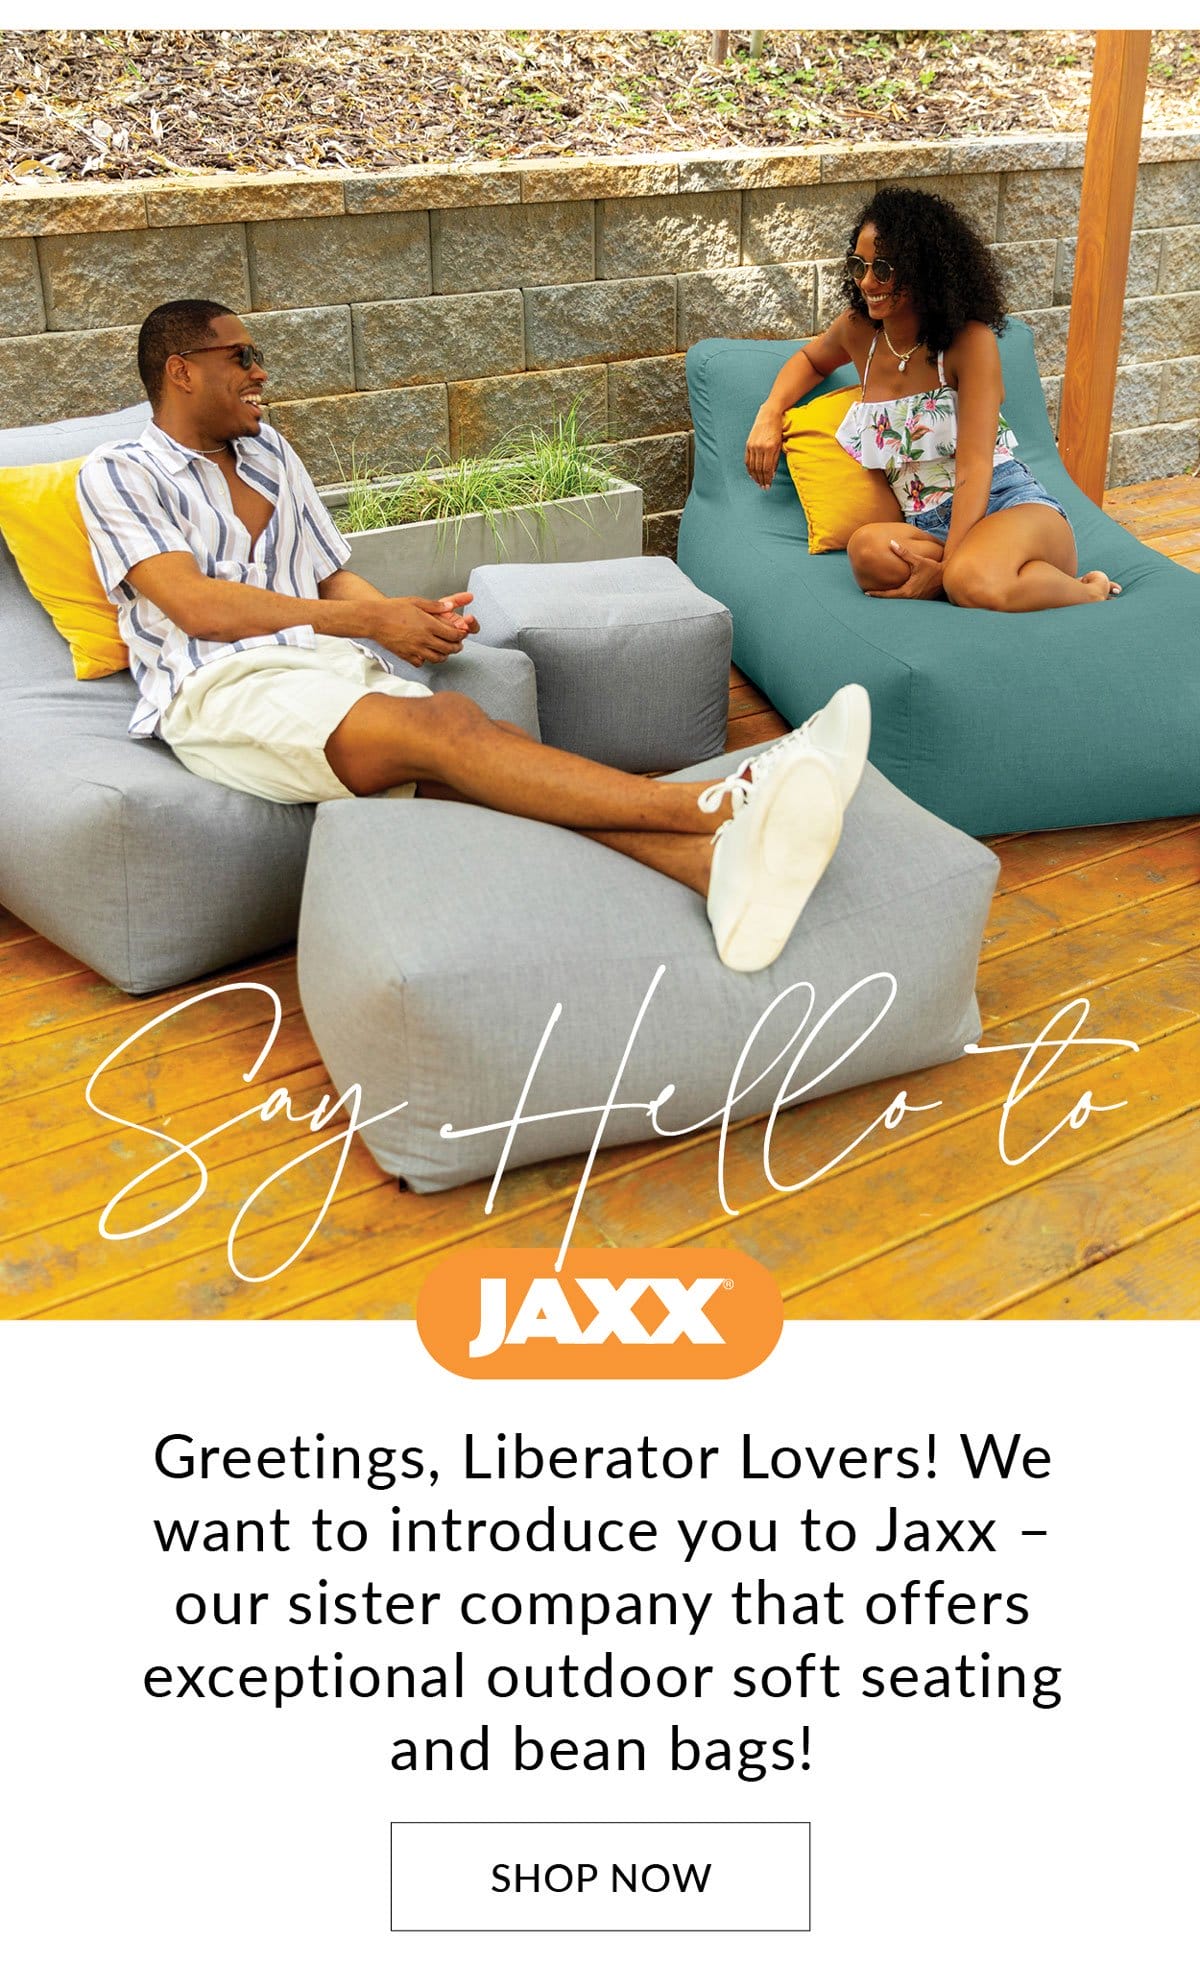 Say Hello to Jaxx Greetings, Liberator Lovers! We want to introduce you to Jaxx – our sister company that offers exceptional outdoor soft seating and bean bags!